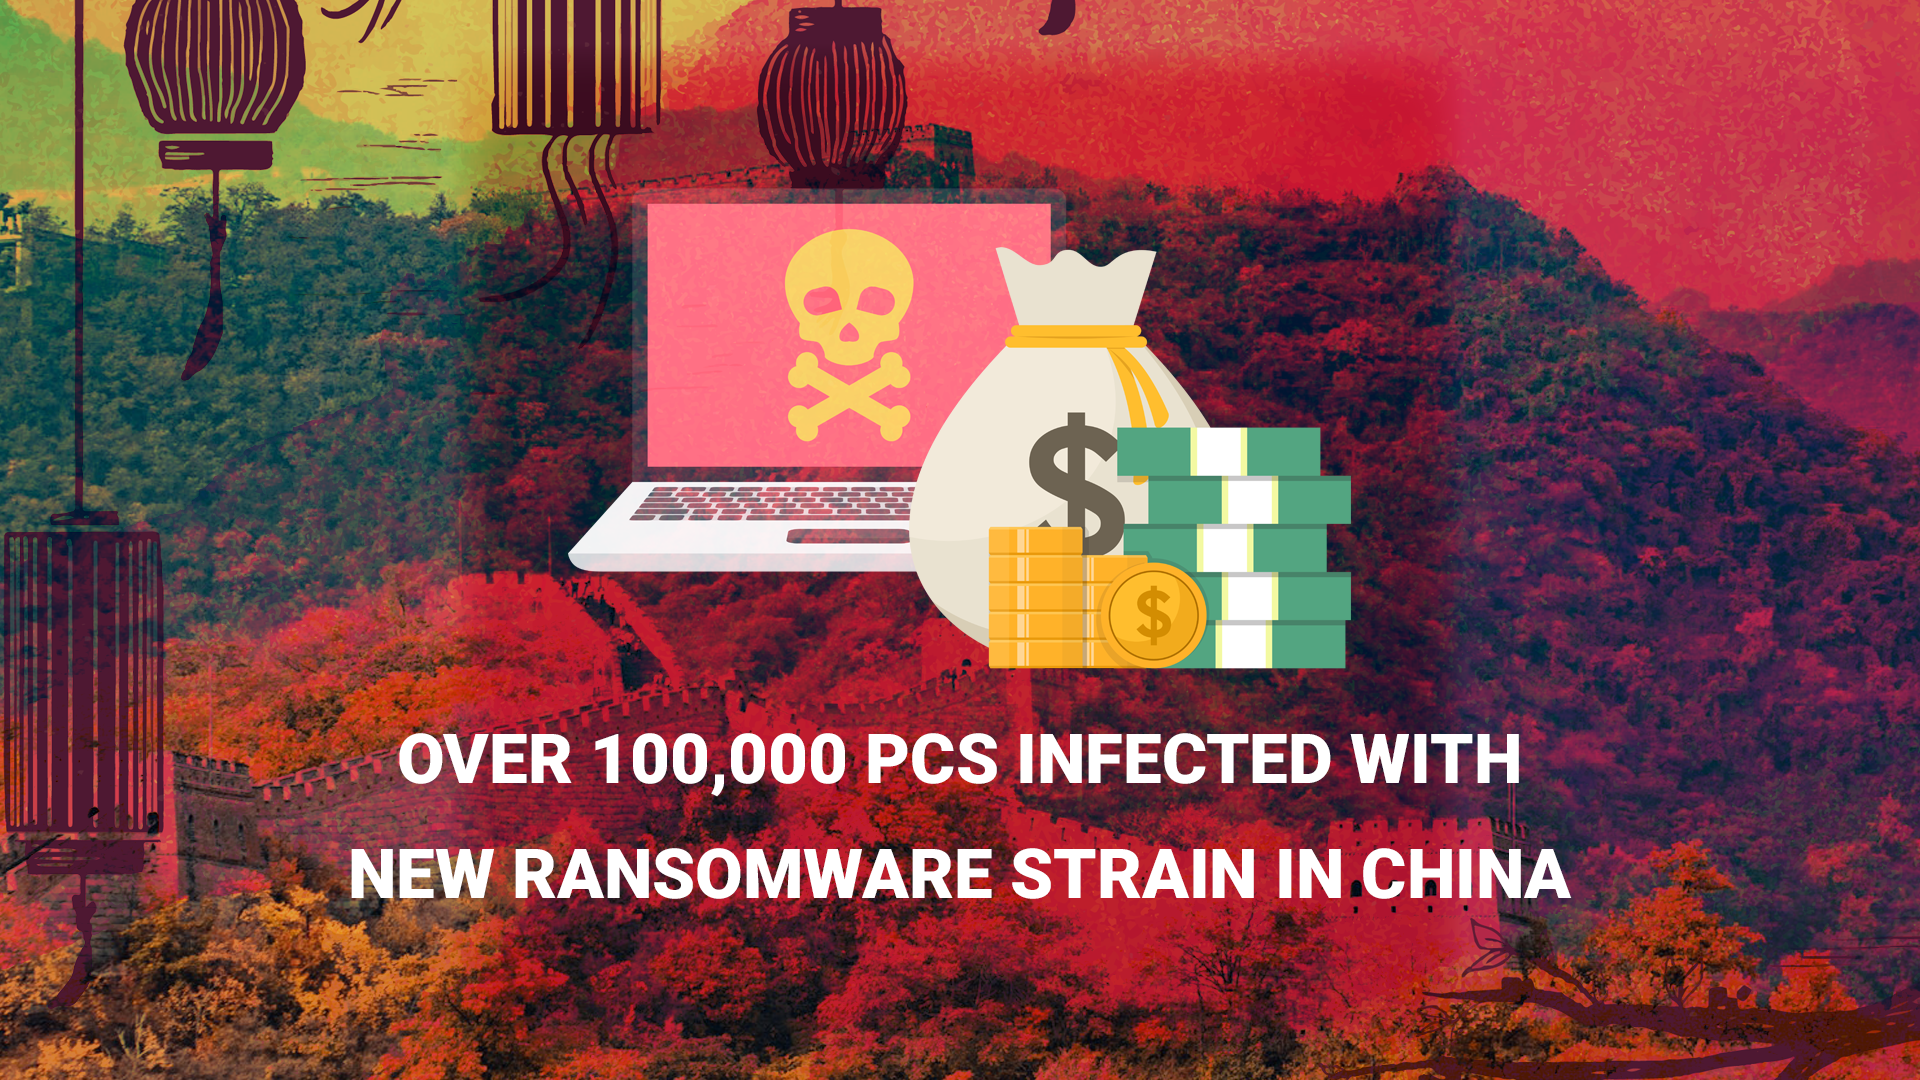 Over 100,000 PCs infected with new ransomware strain in China